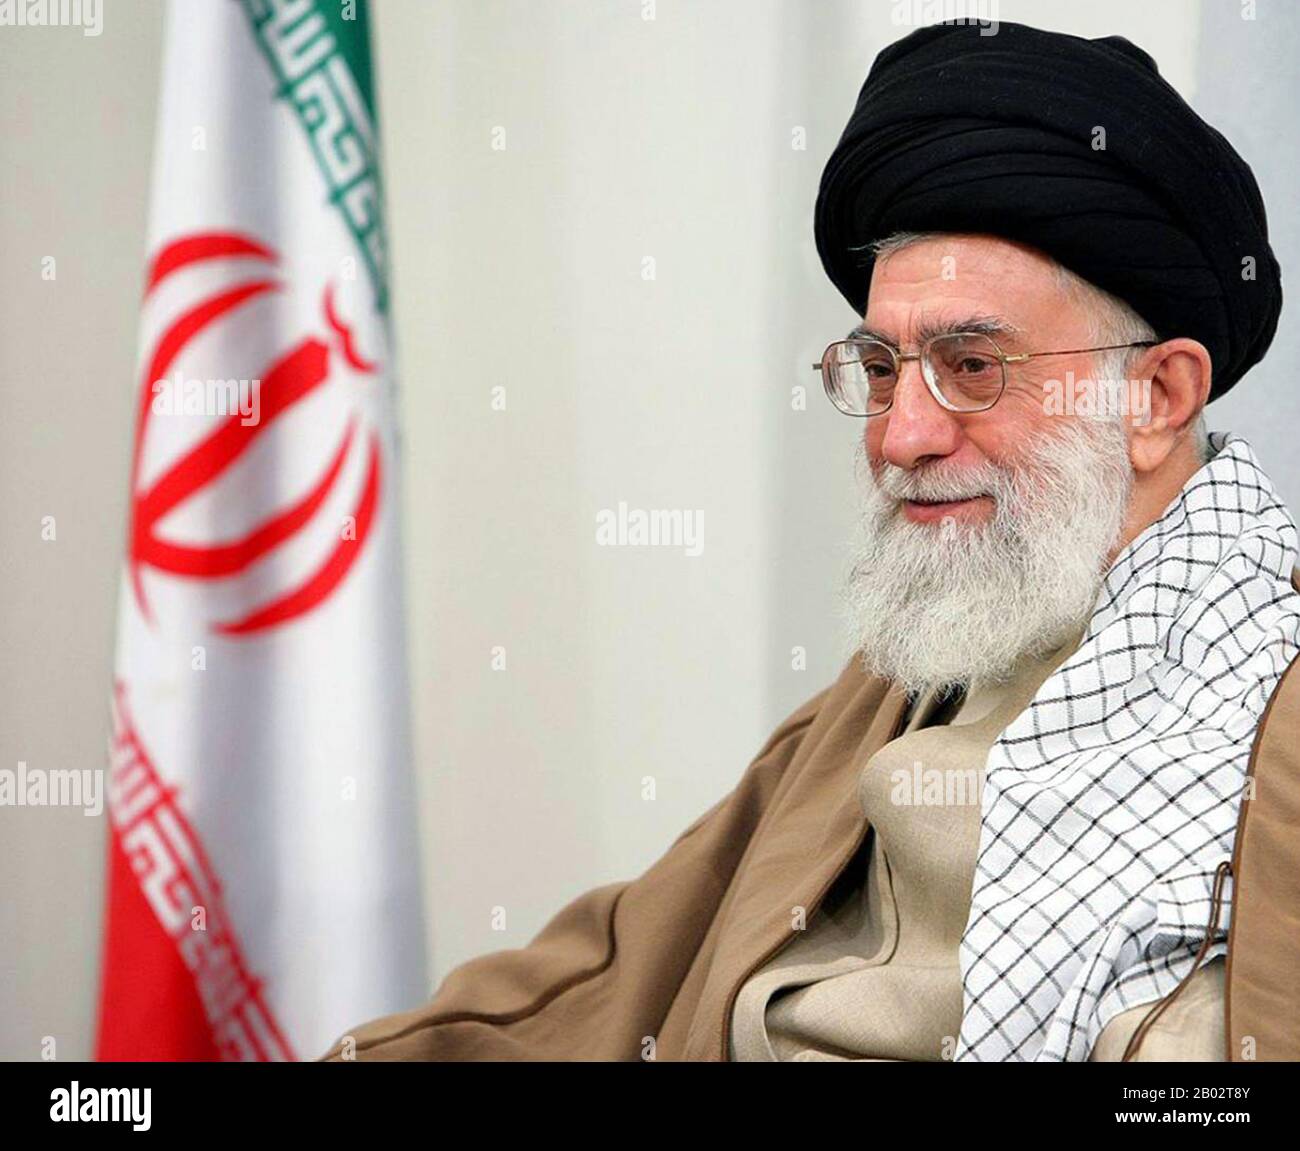 Ali Hosseini Khamenei is the second and current Supreme Leader of Iran and a Shia Cleric. Ali Khamenei succeeded Ruhollah Khomeini, the leader of the Iranian Revolution, after Khomeini's death, being elected as the new Supreme Leader by the Assembly of Experts on 4 June 1989.  He had also served as the President of Iran from 1981 to 1989. Stock Photo